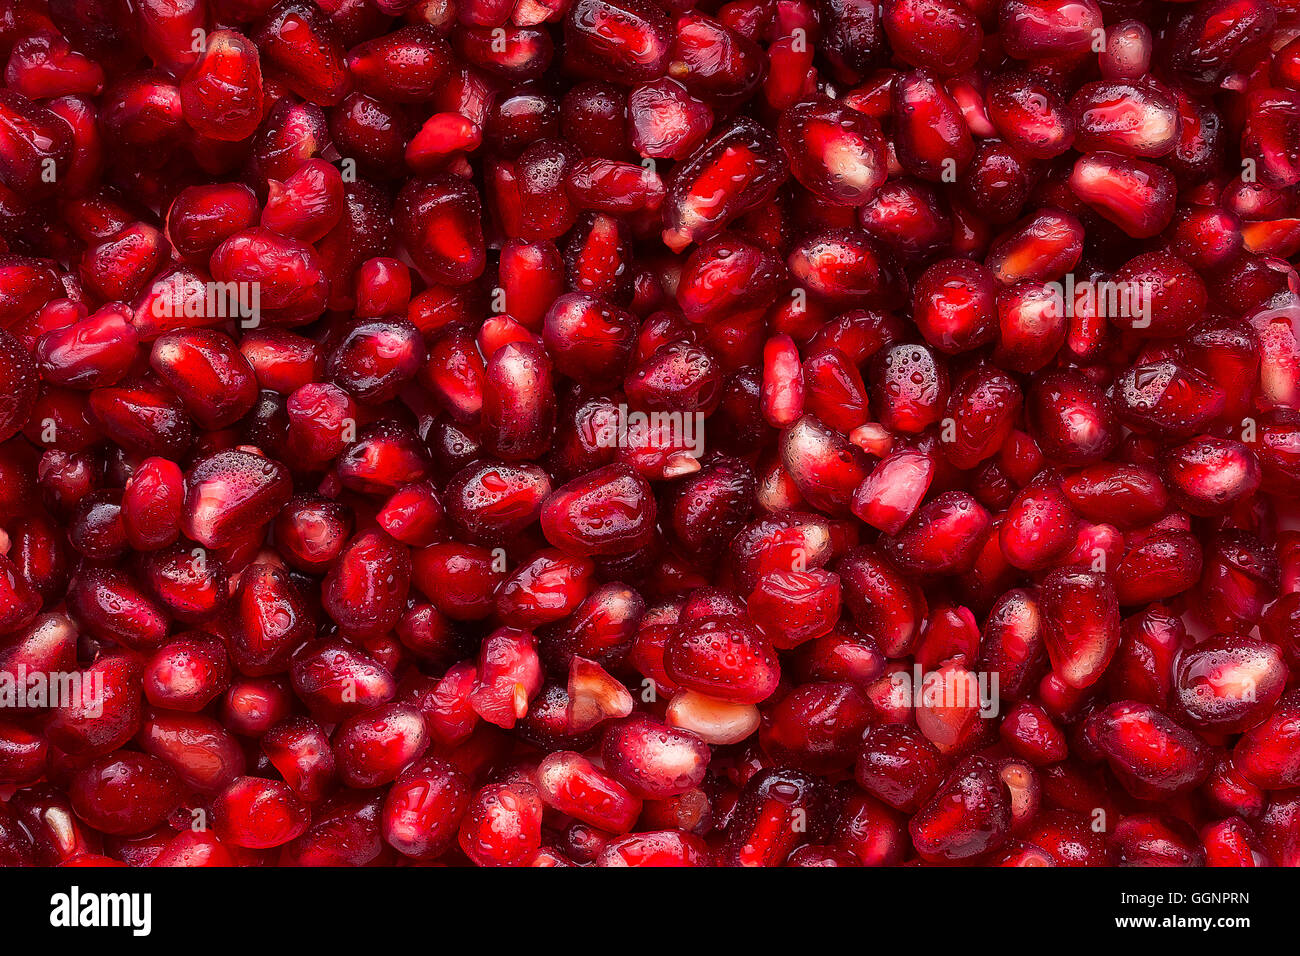 Pile of wet red pomegranate seeds Stock Photo